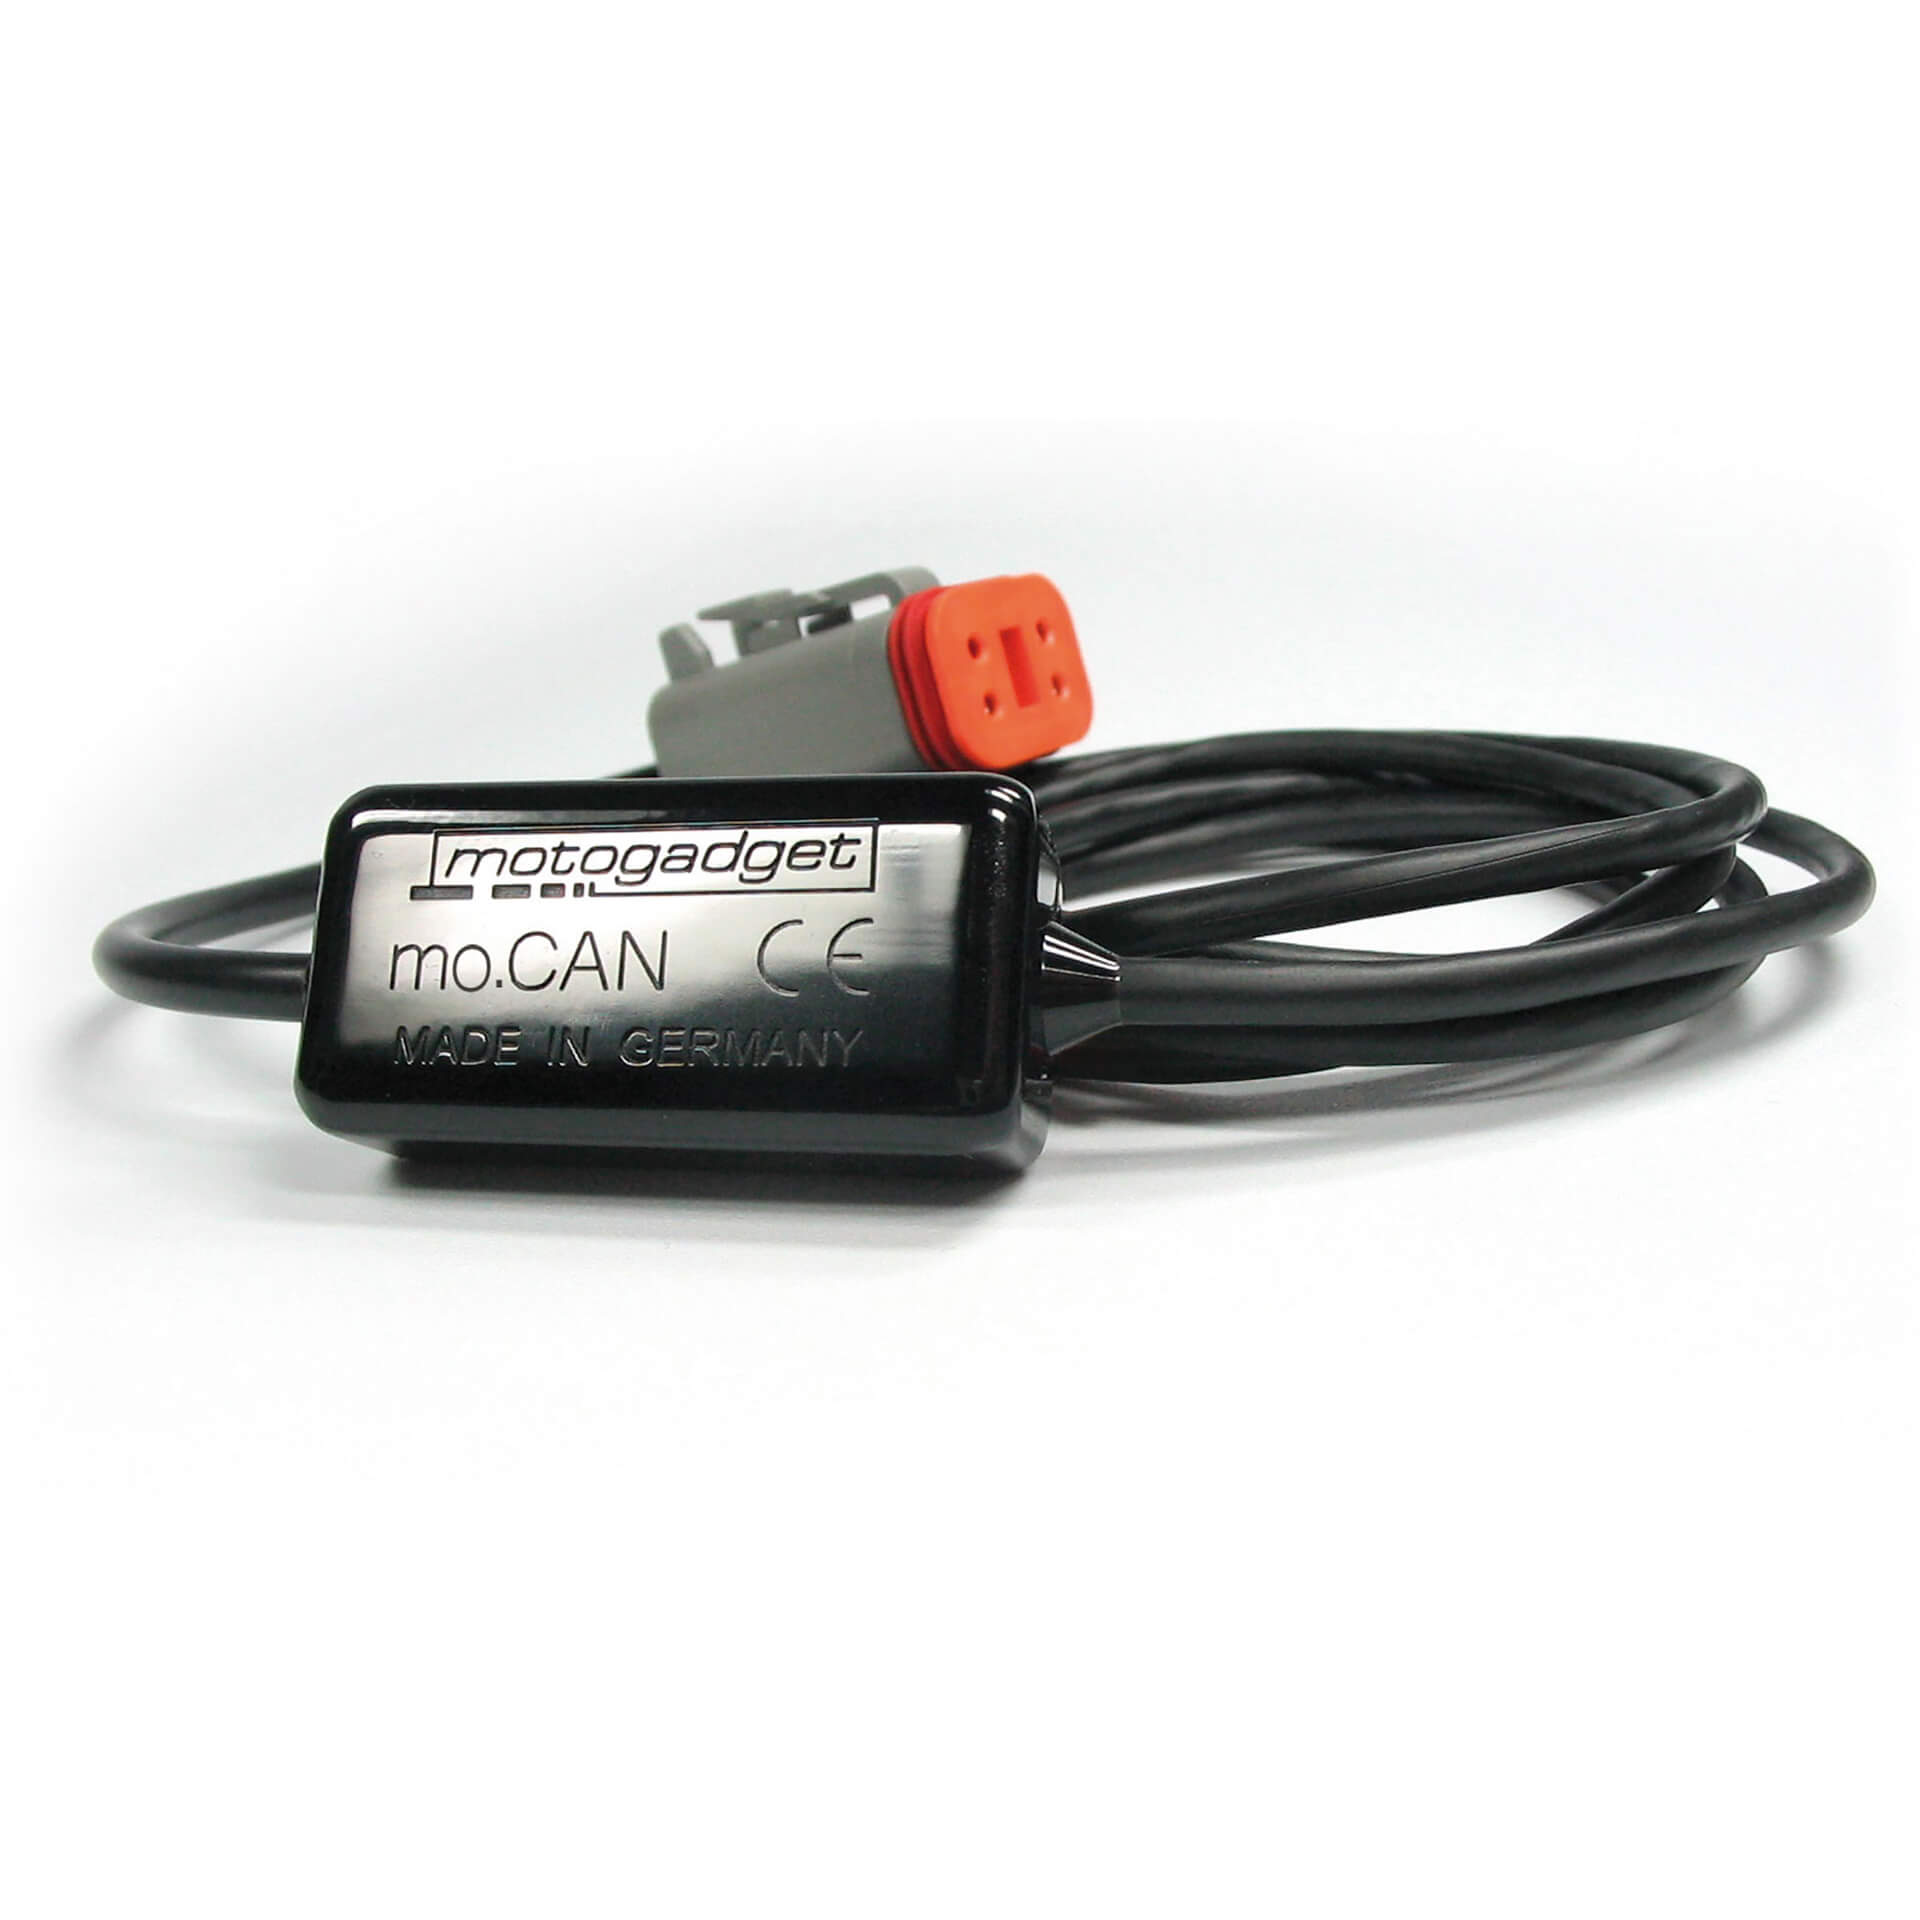 motogadget mo.CAN signal converter for H-D